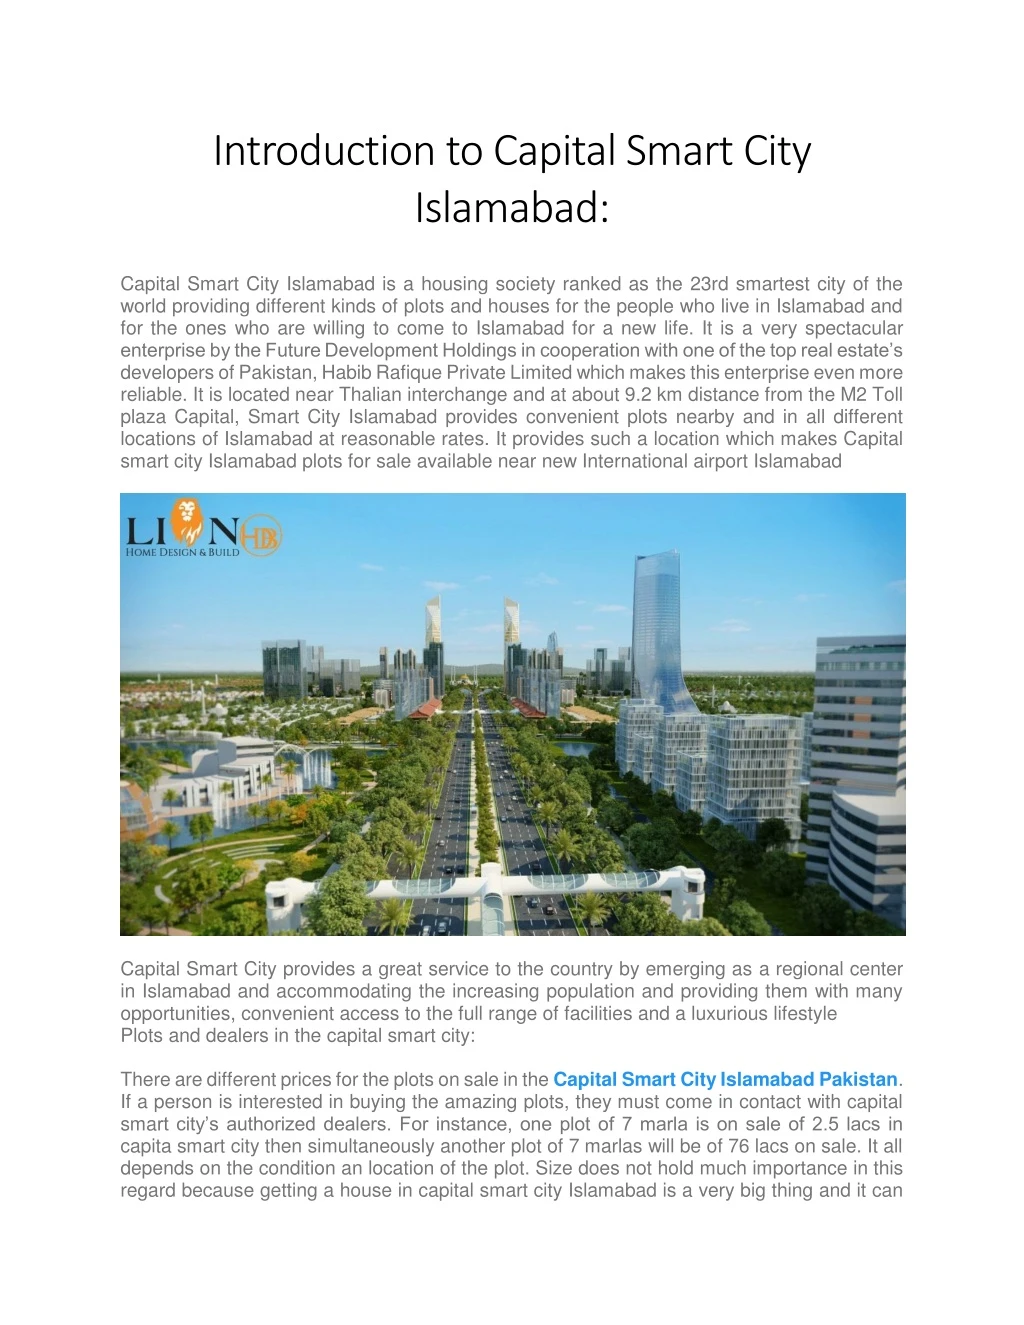 introduction to capital smart city islamabad